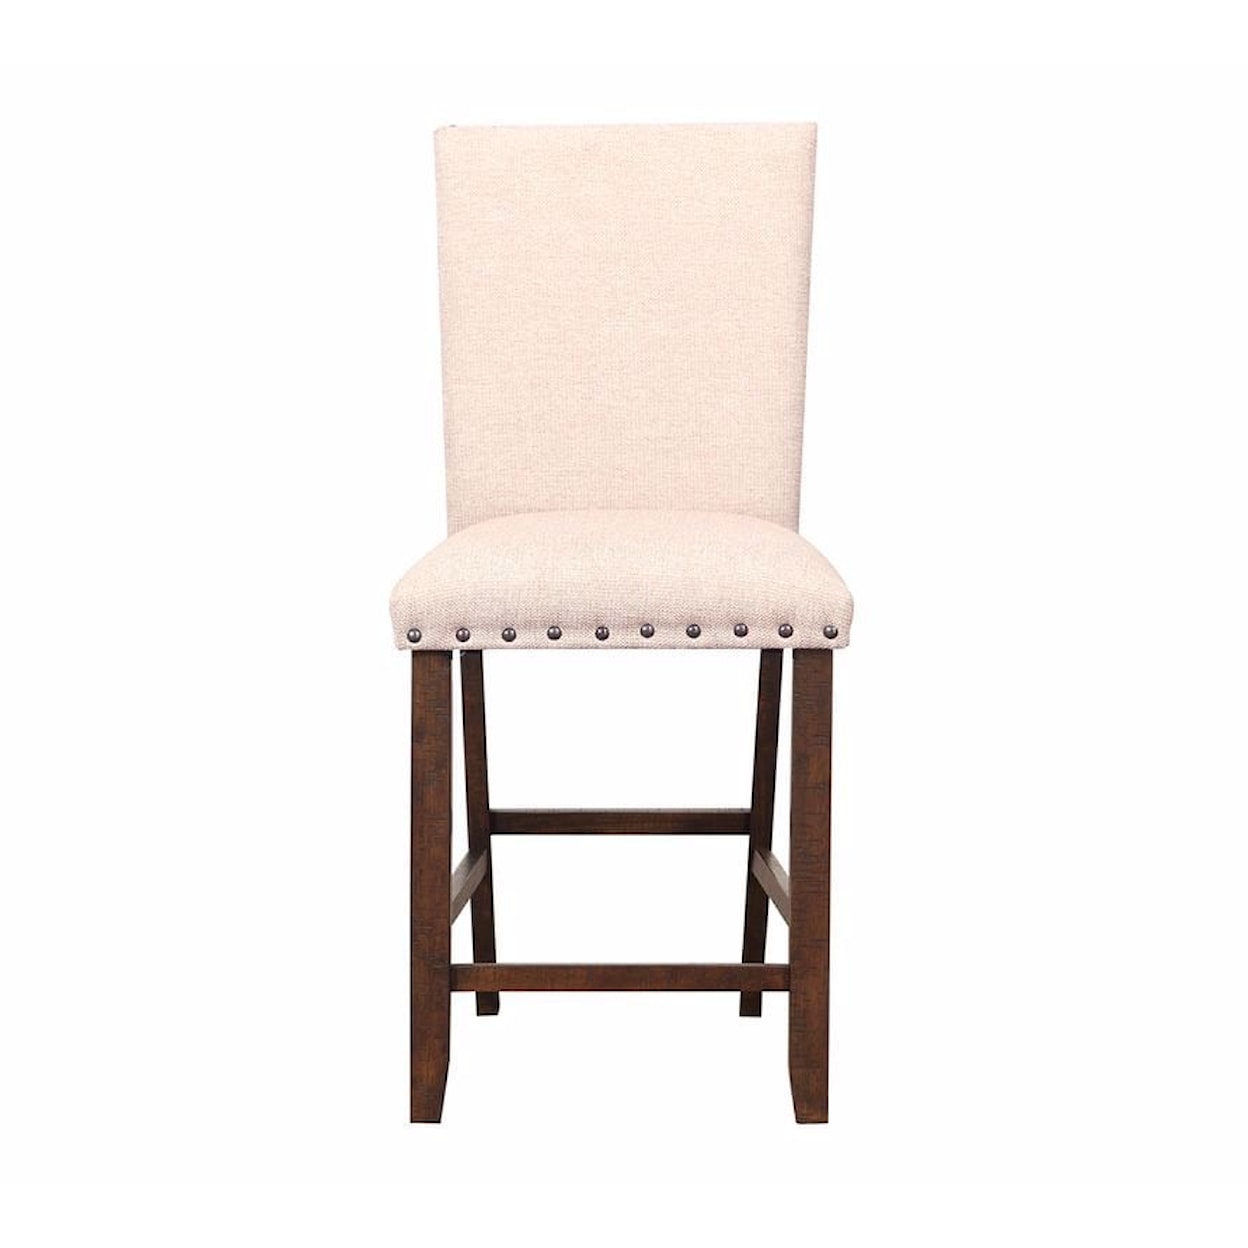 JB Home Darcy Darcy Captain's Chair